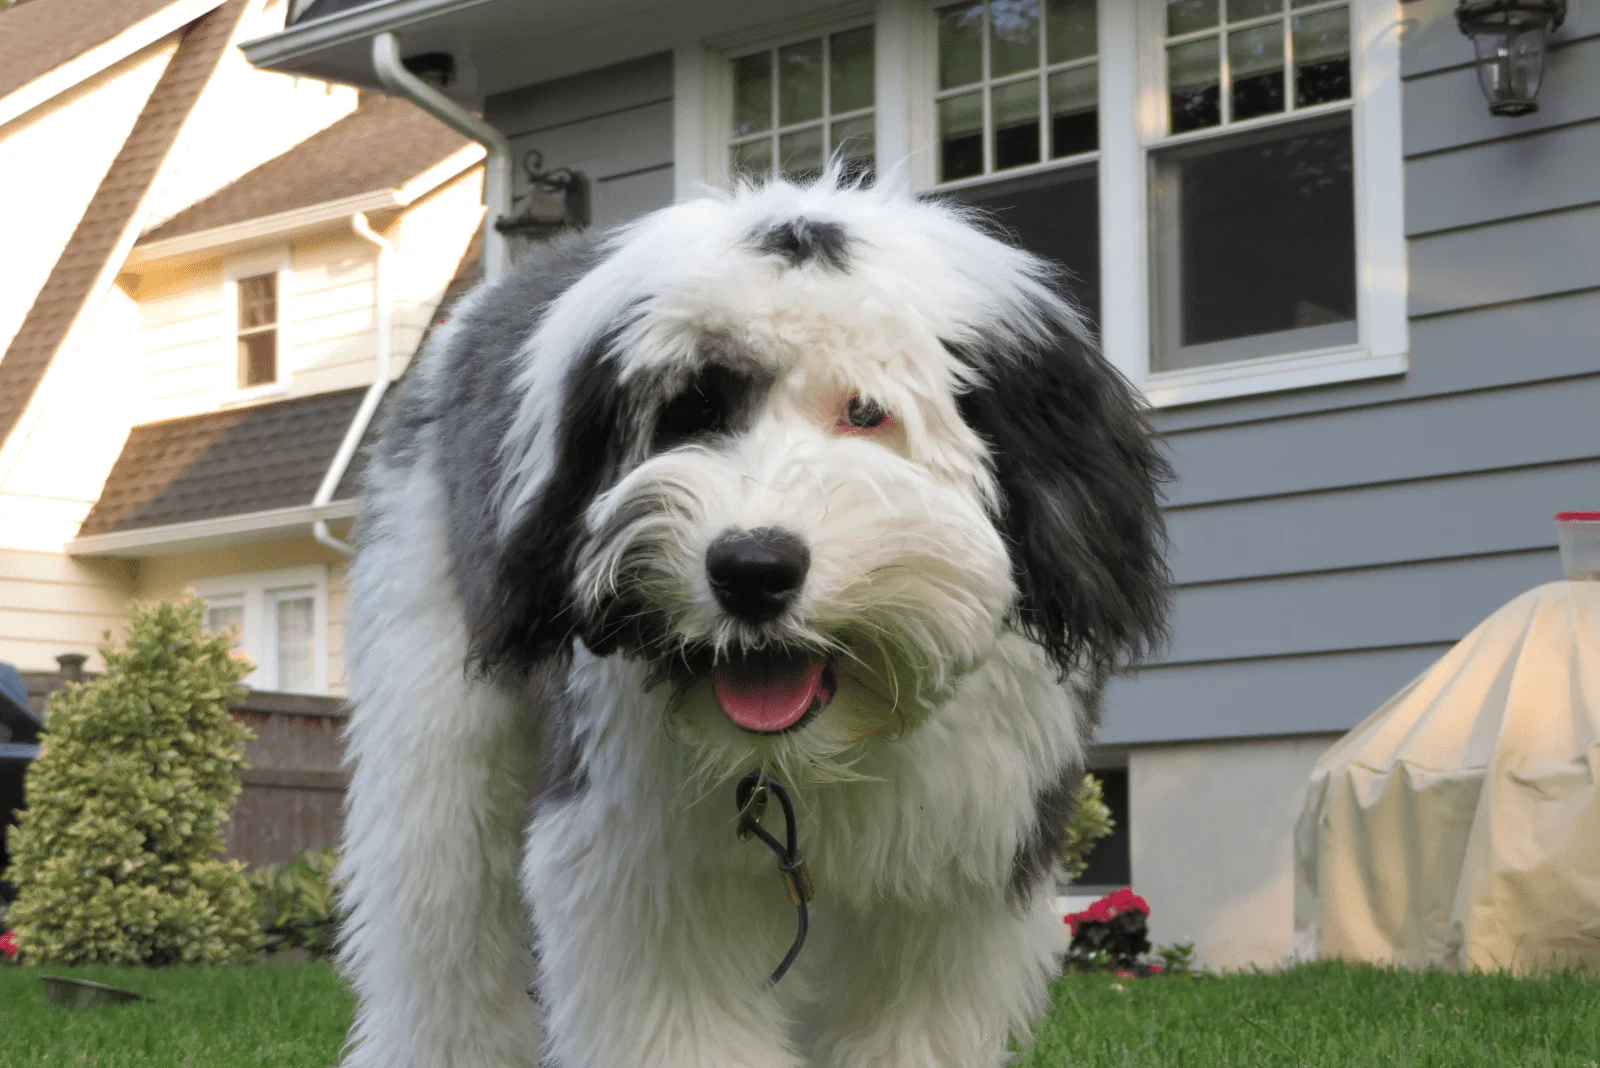 Sheepadoodle is standing and looking at the camera